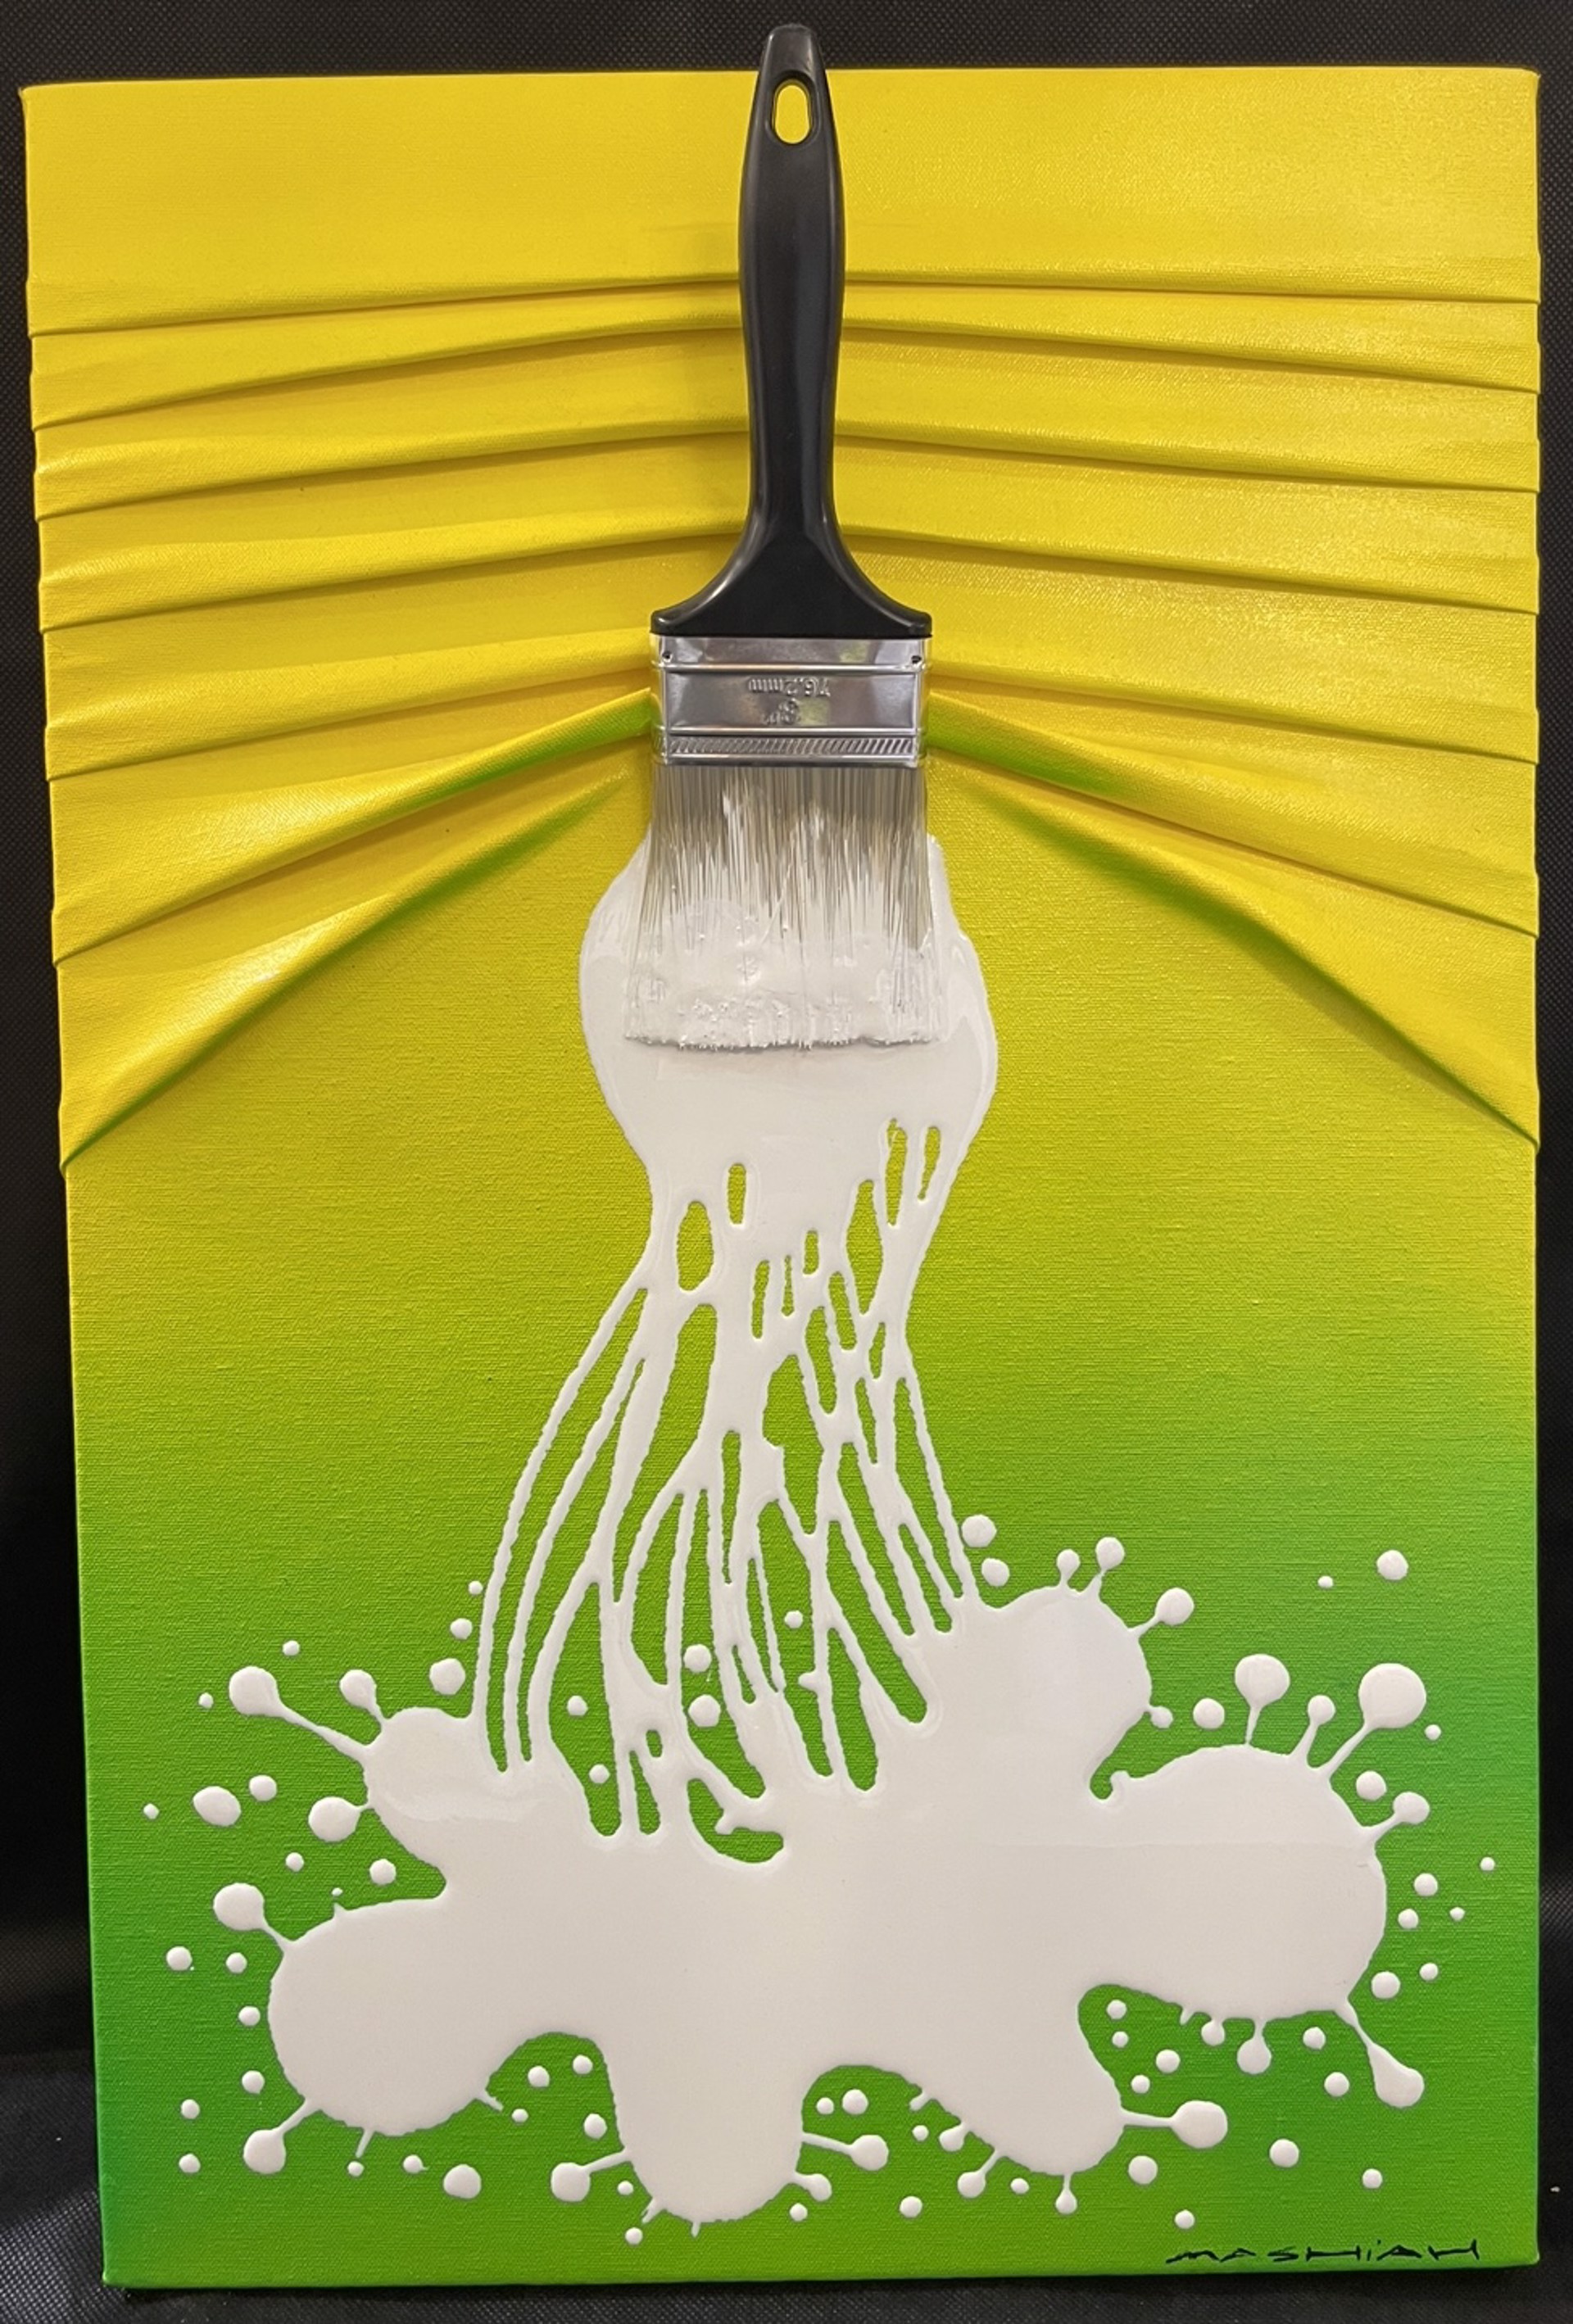 White Splash on the Yellow/Green Canvas by Brushes and Rollers "Let's Paint" by Efi Mashiah